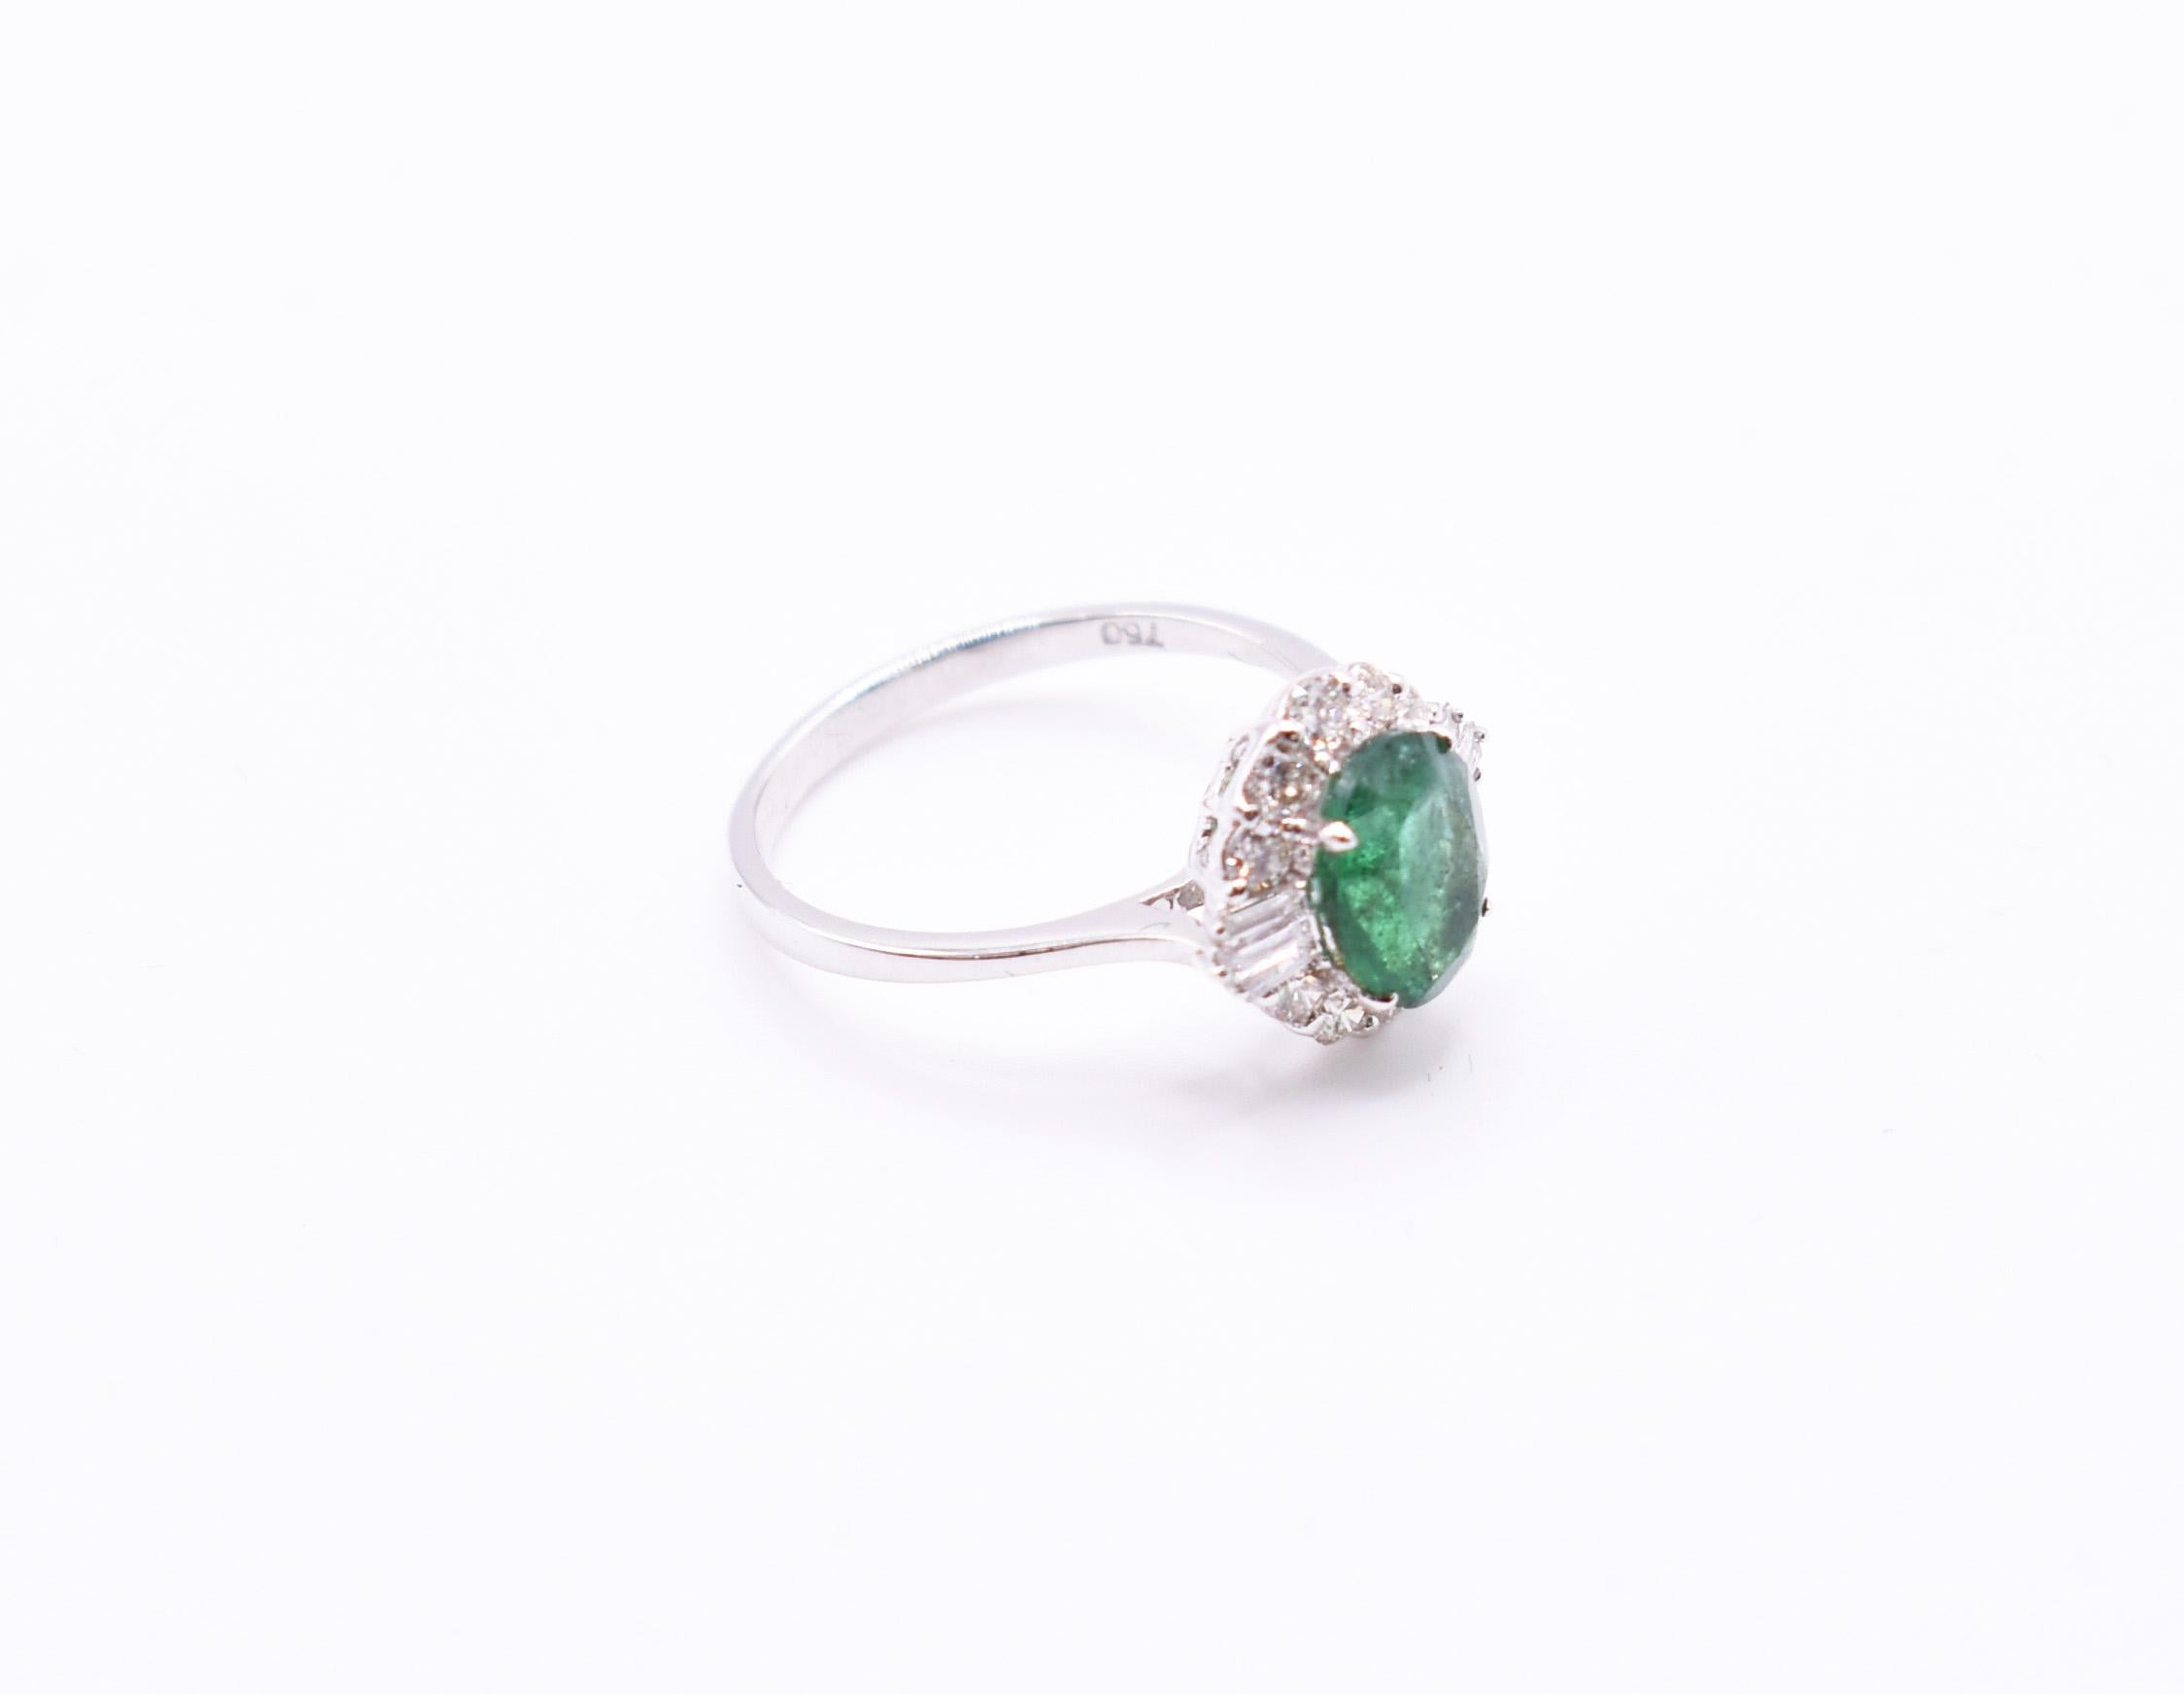 A splendid 18k white gold emerald & diamond ring. A good quality emerald, of Zambian origin, is 1.86ct, while the diamonds total 0.63ct. VS/SU/G/H Colour.

Ring Size UK: O US: 7

RRP: £3,995